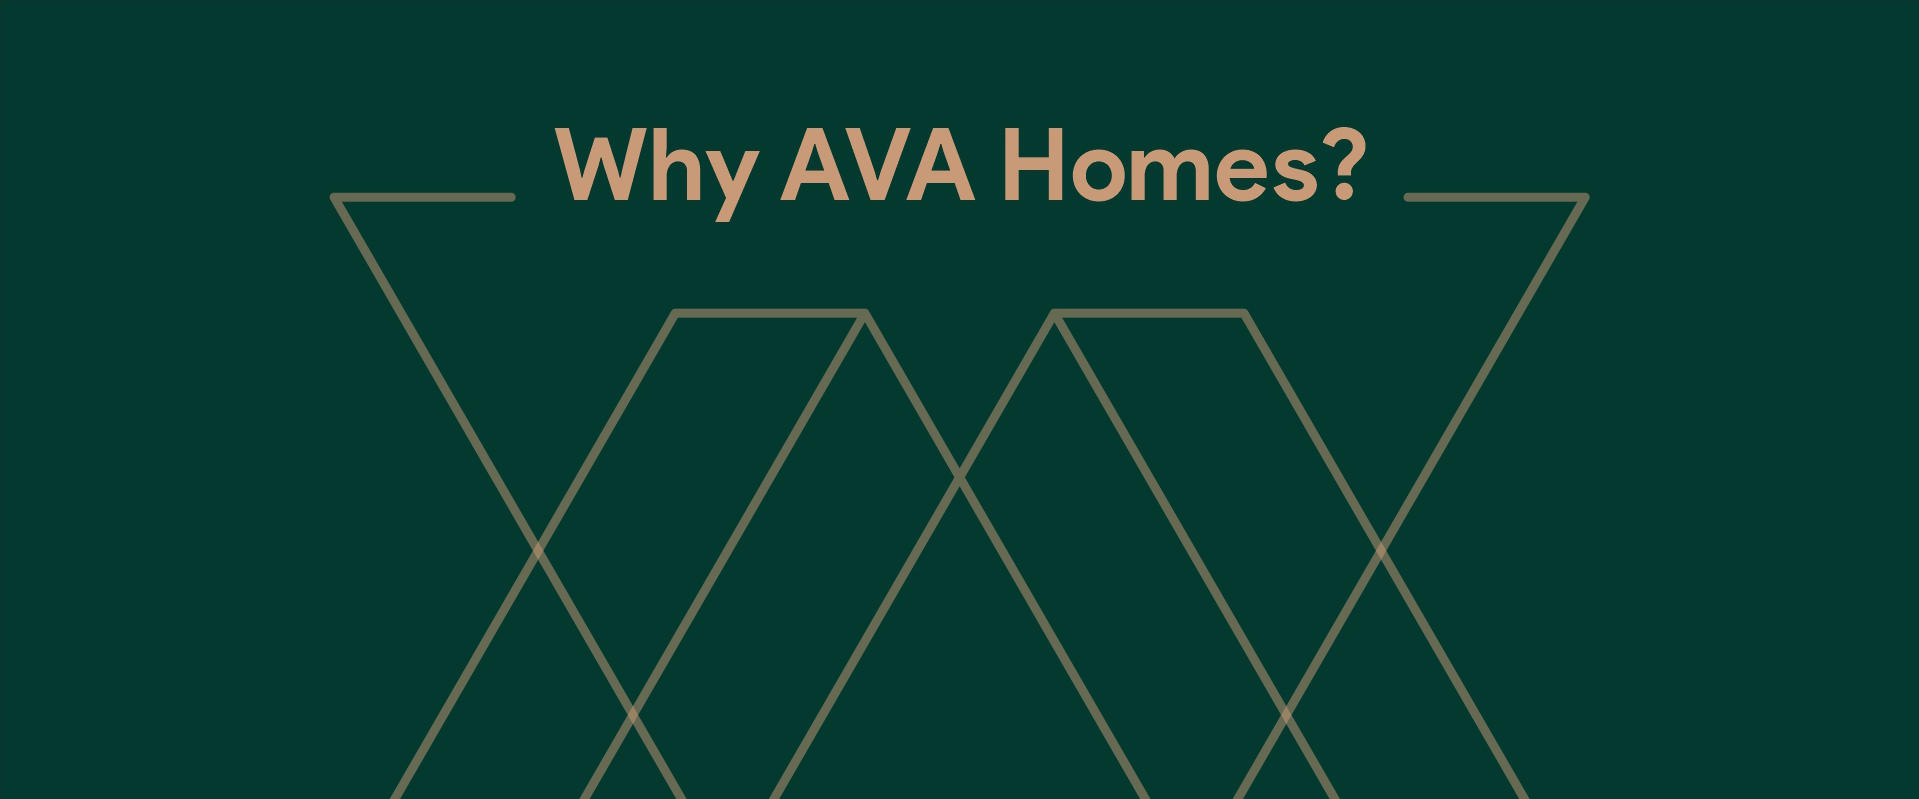 Why AVA Homes page banner for desktop view